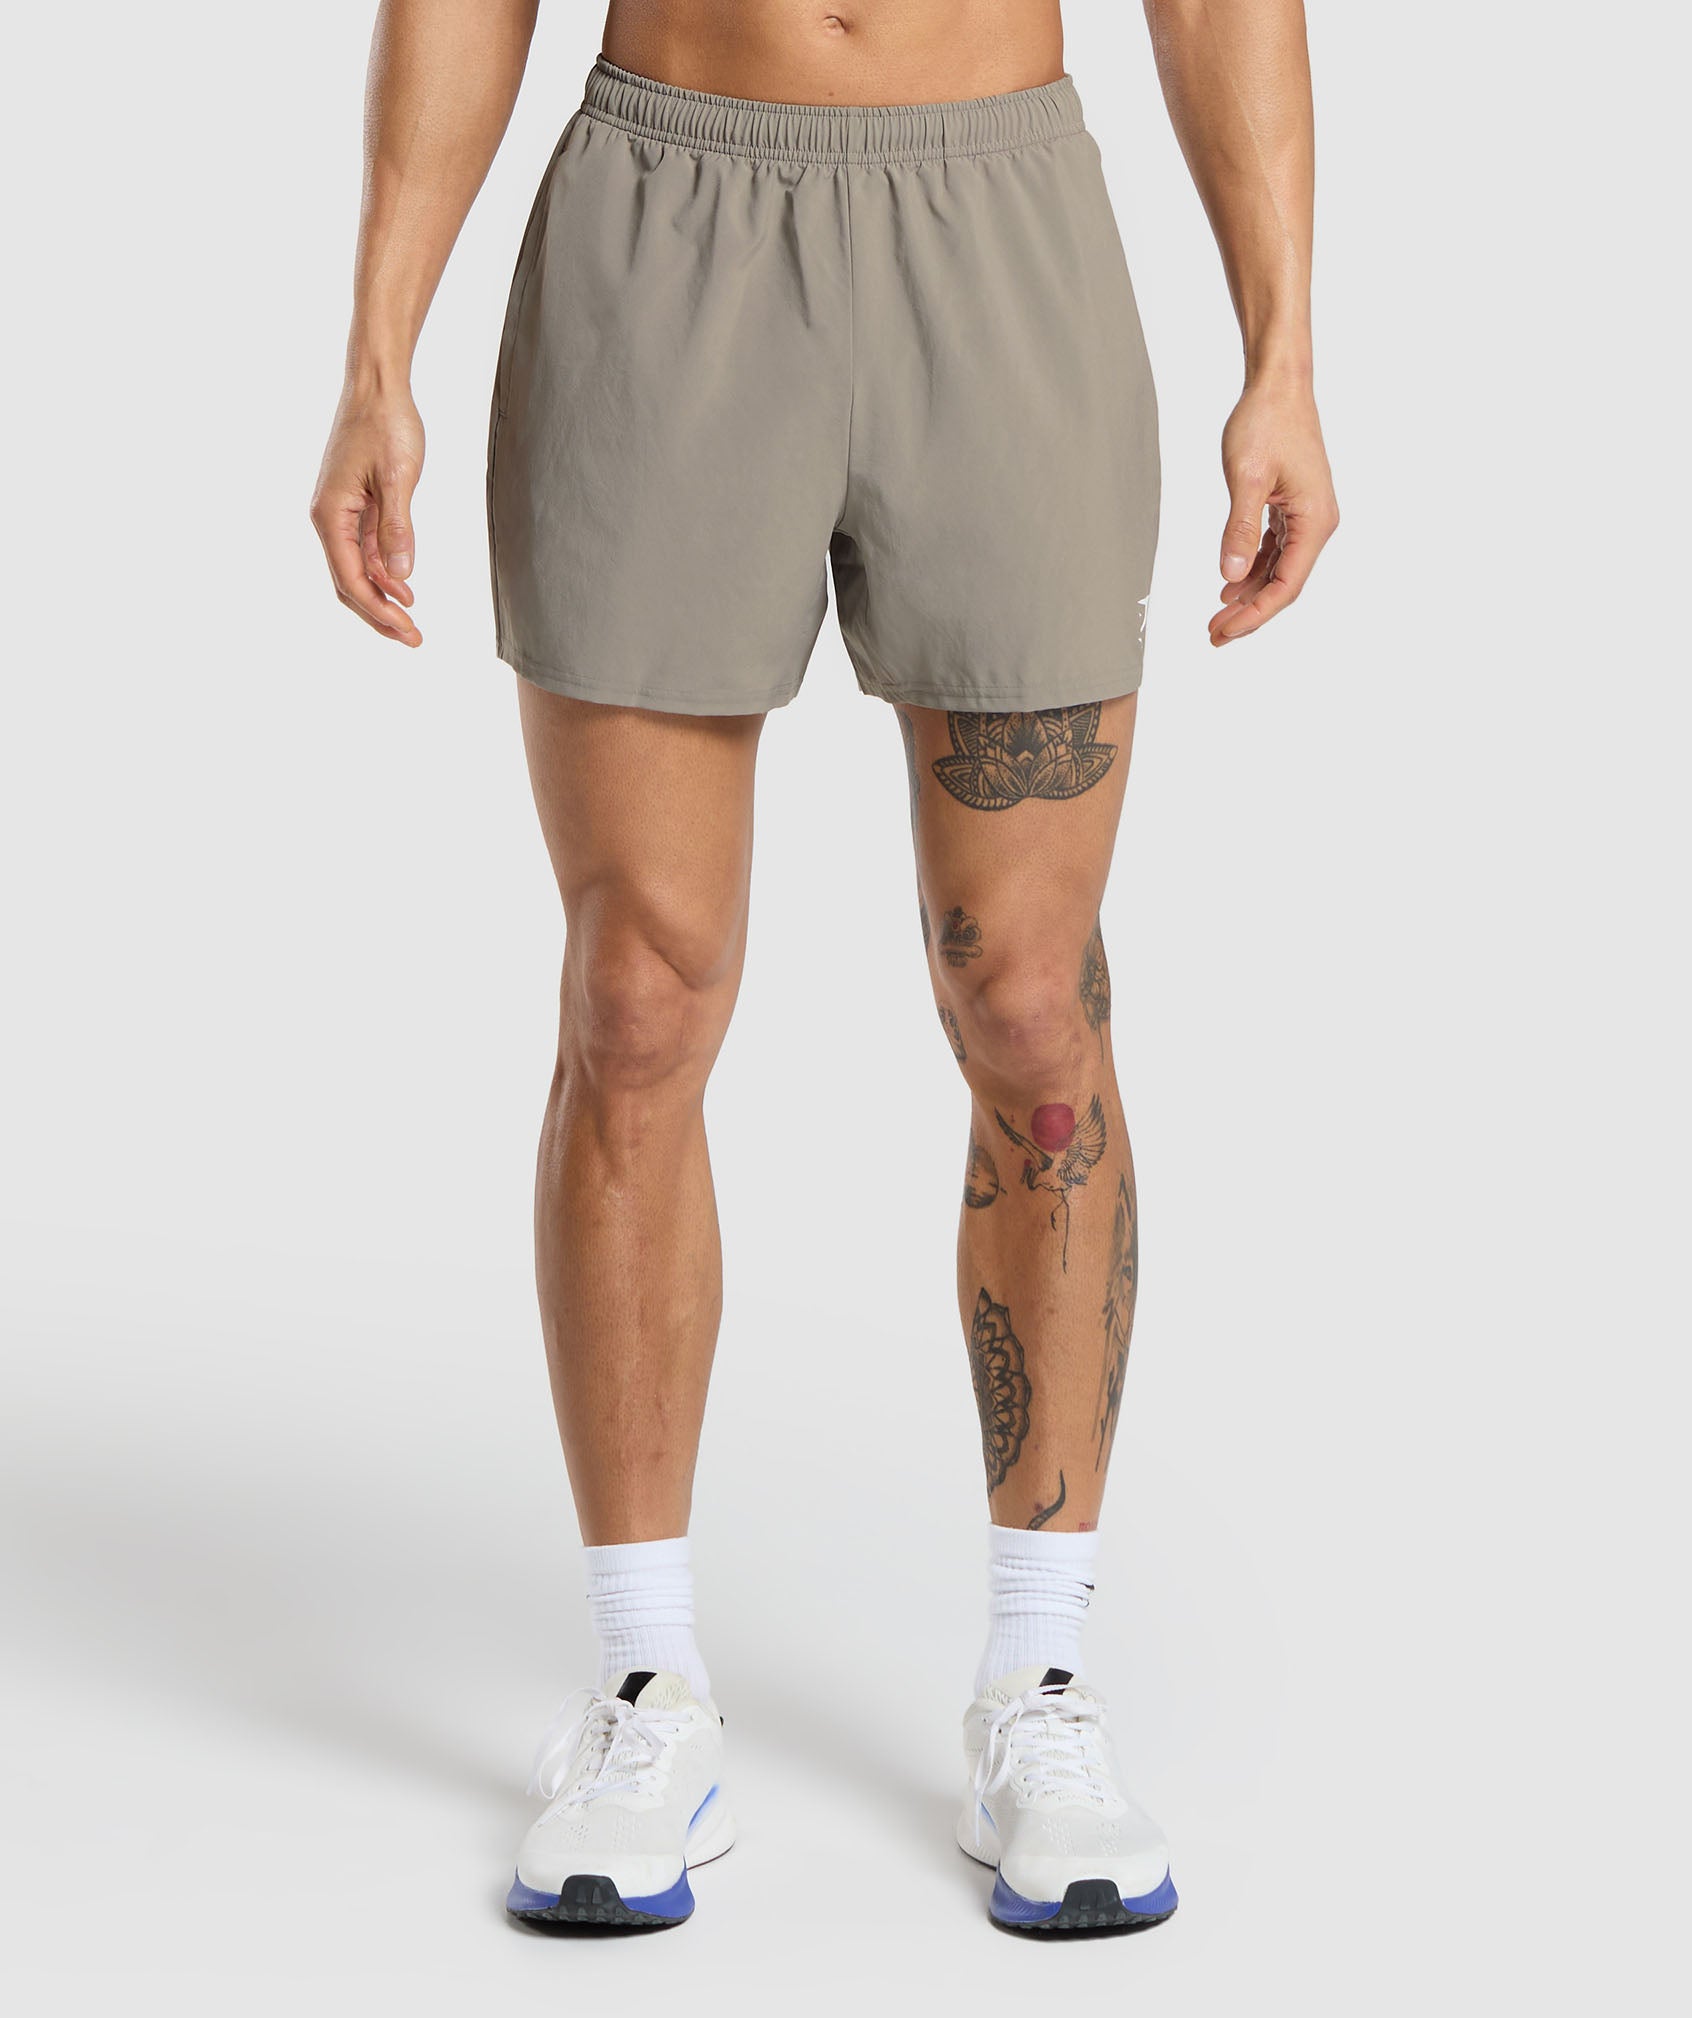 Arrival 5" Shorts in Linen Brown is out of stock